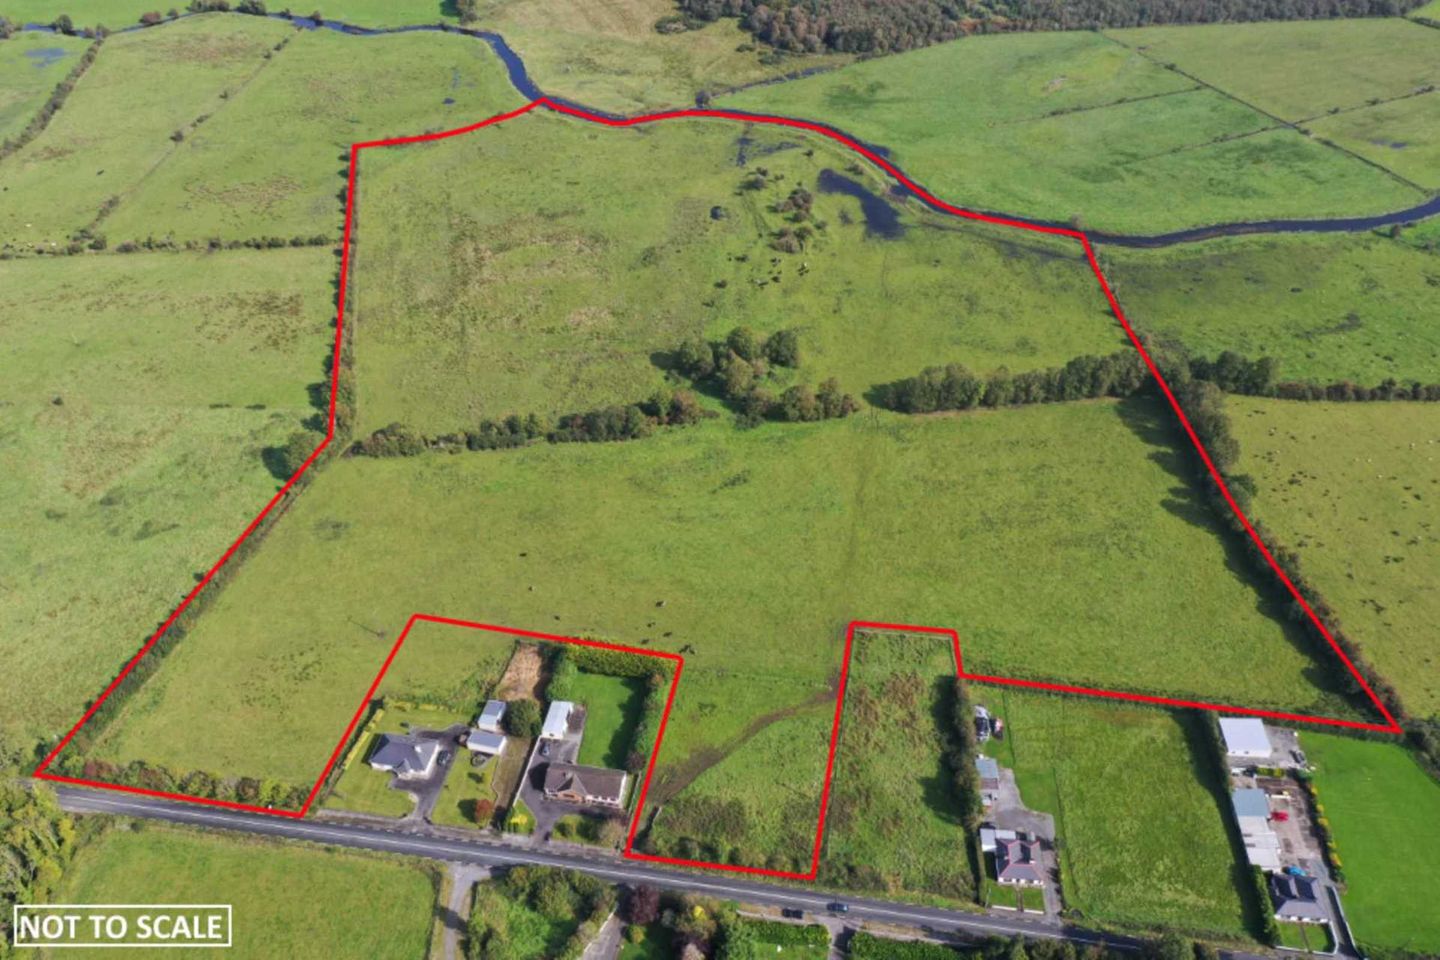 c. 32.70 Acres at Lowville, Ahascragh, Co. Galway